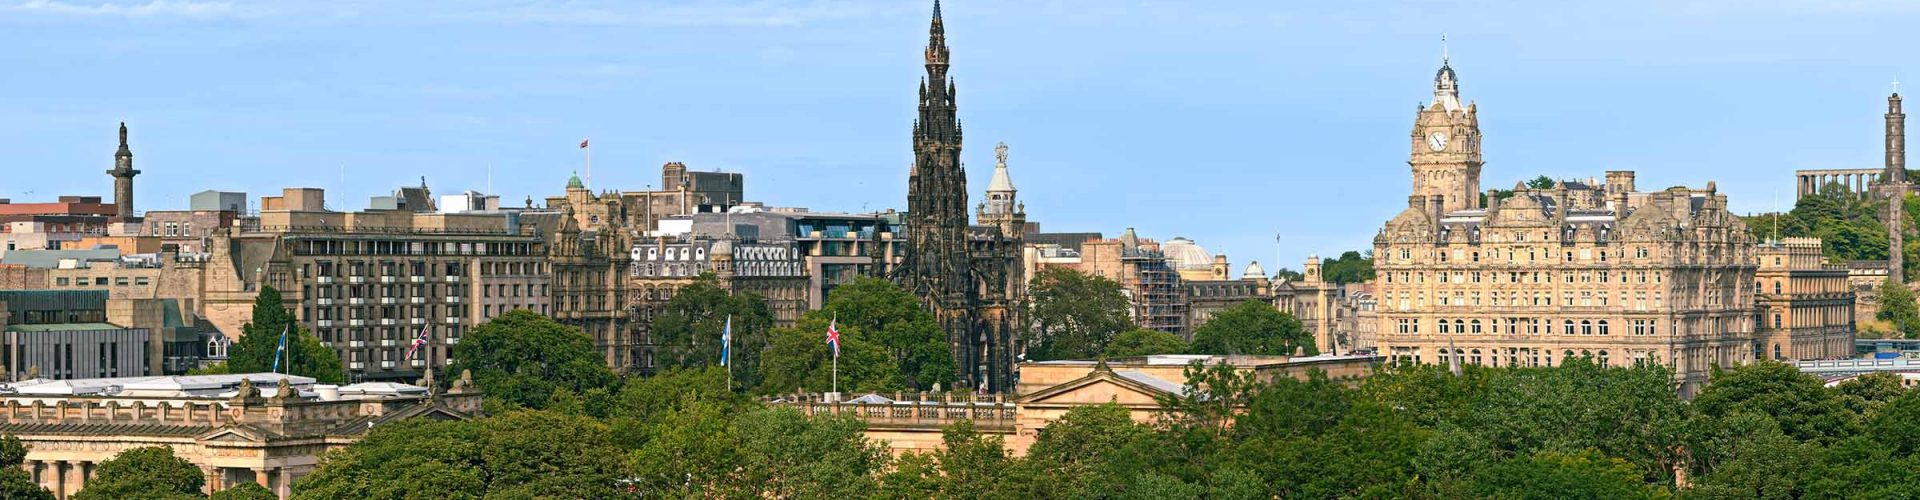 A panoramic view of the buildings along Princes Street in Edinburgh